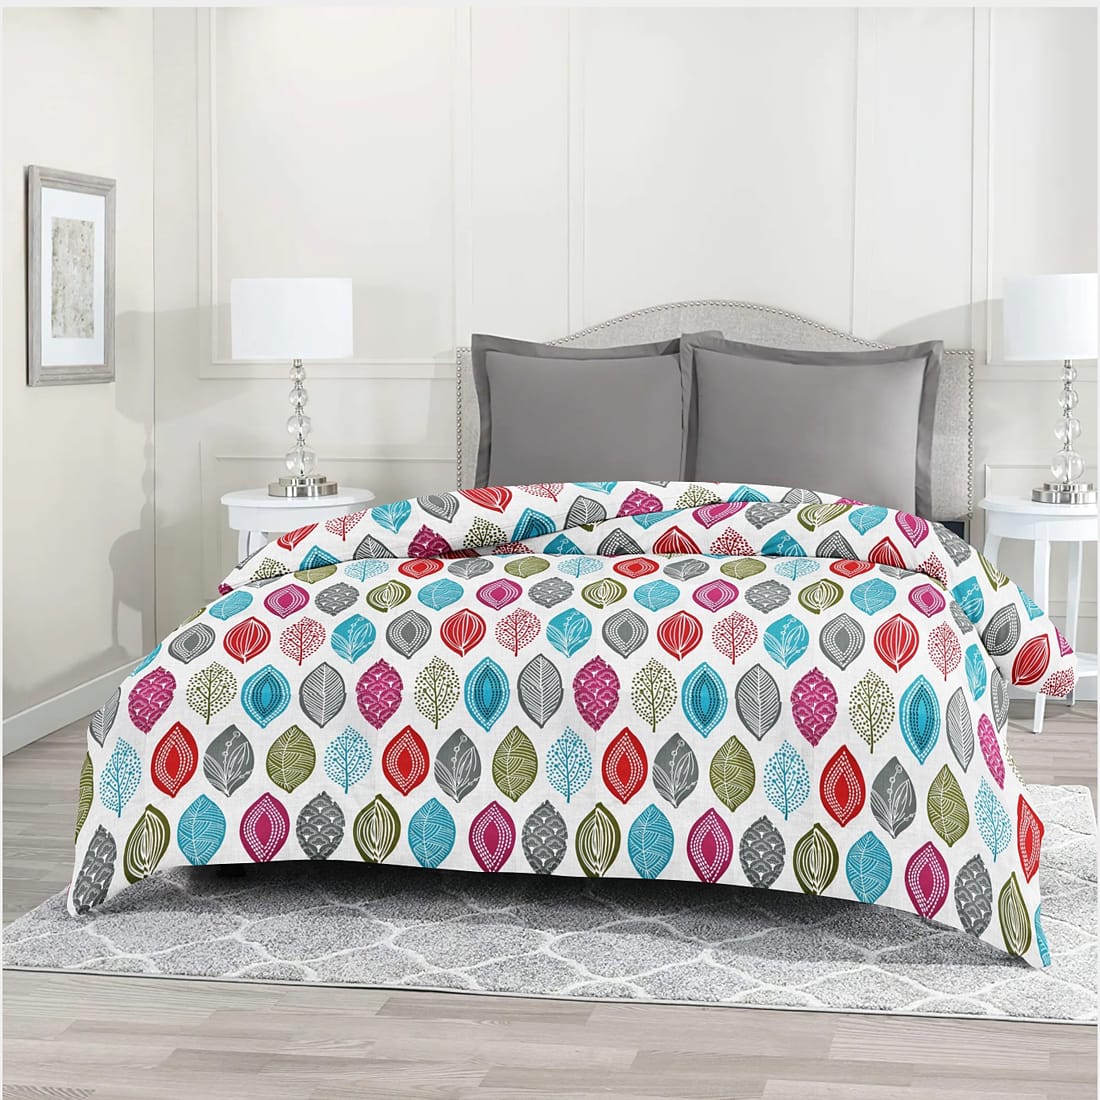 Feathers Print Orange Cotton Duvet Vecotor Pattern Cover online in India 